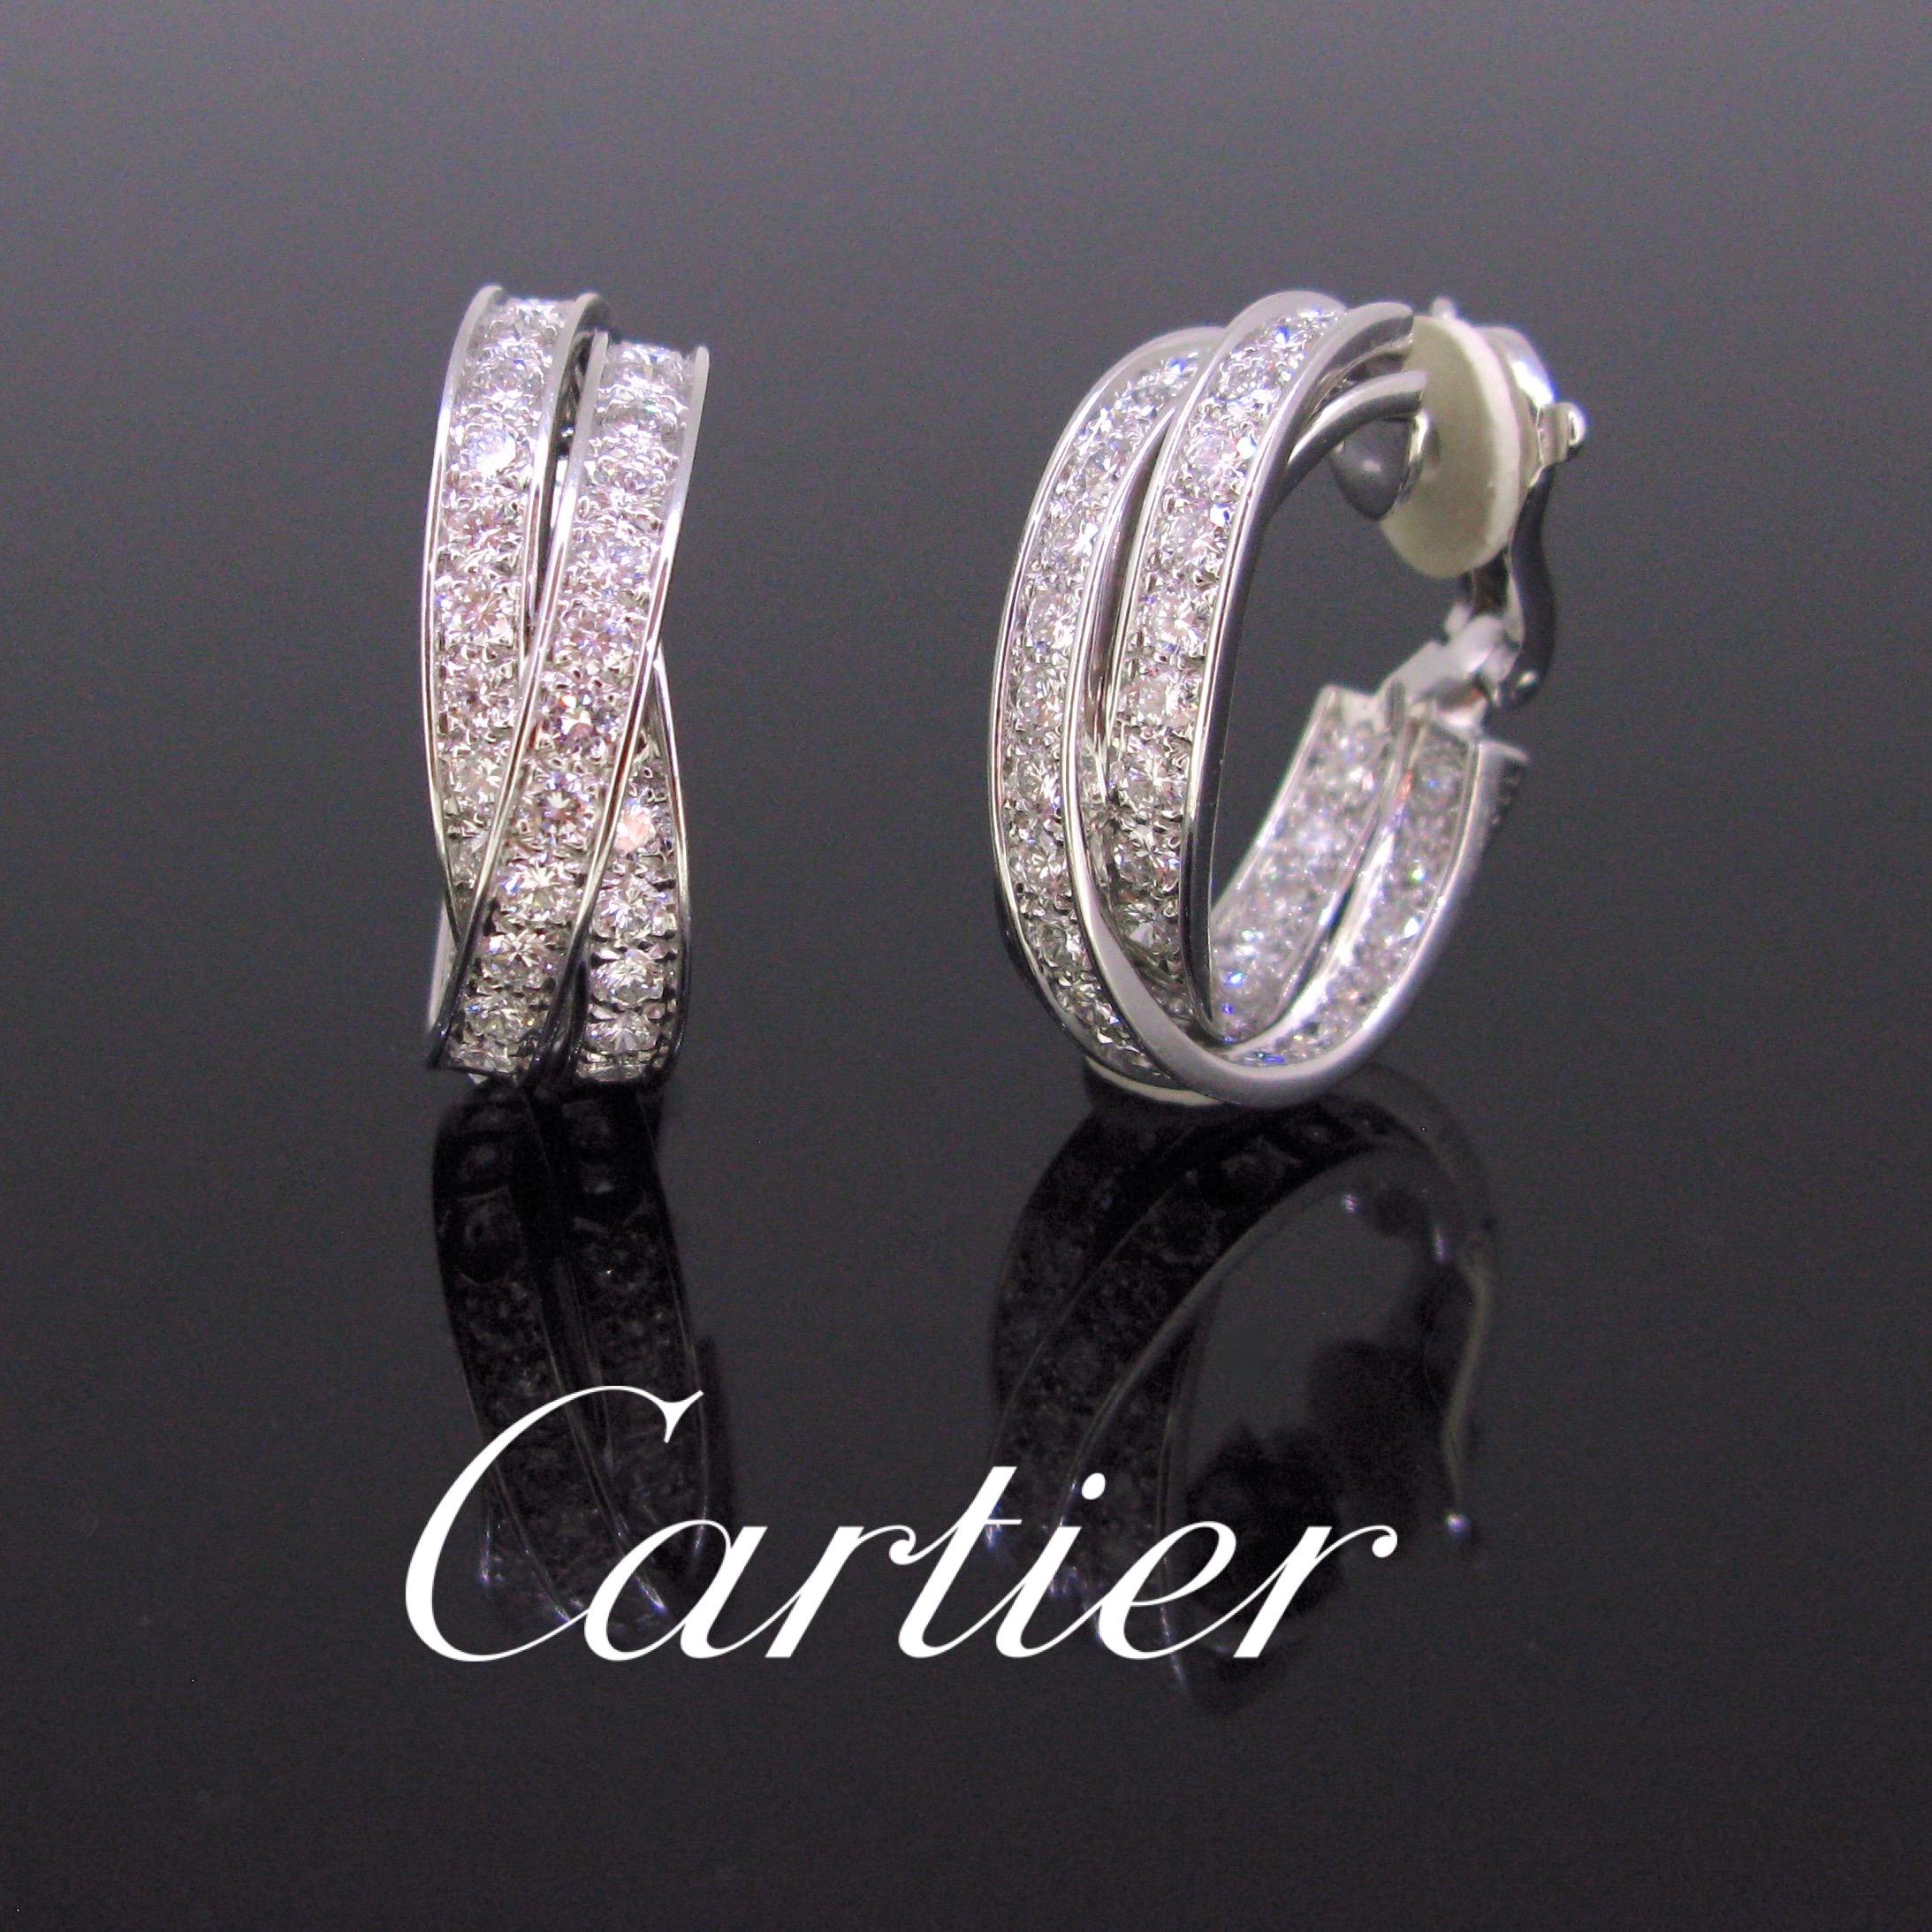 This glamorous pair of earrings comes from the Cartier’s iconic Trinity collection. They are made in 18kt white gold and set with brilliant cut diamonds. There is an approximate total carat weight of 6ct. They are signed and numbered, marked with